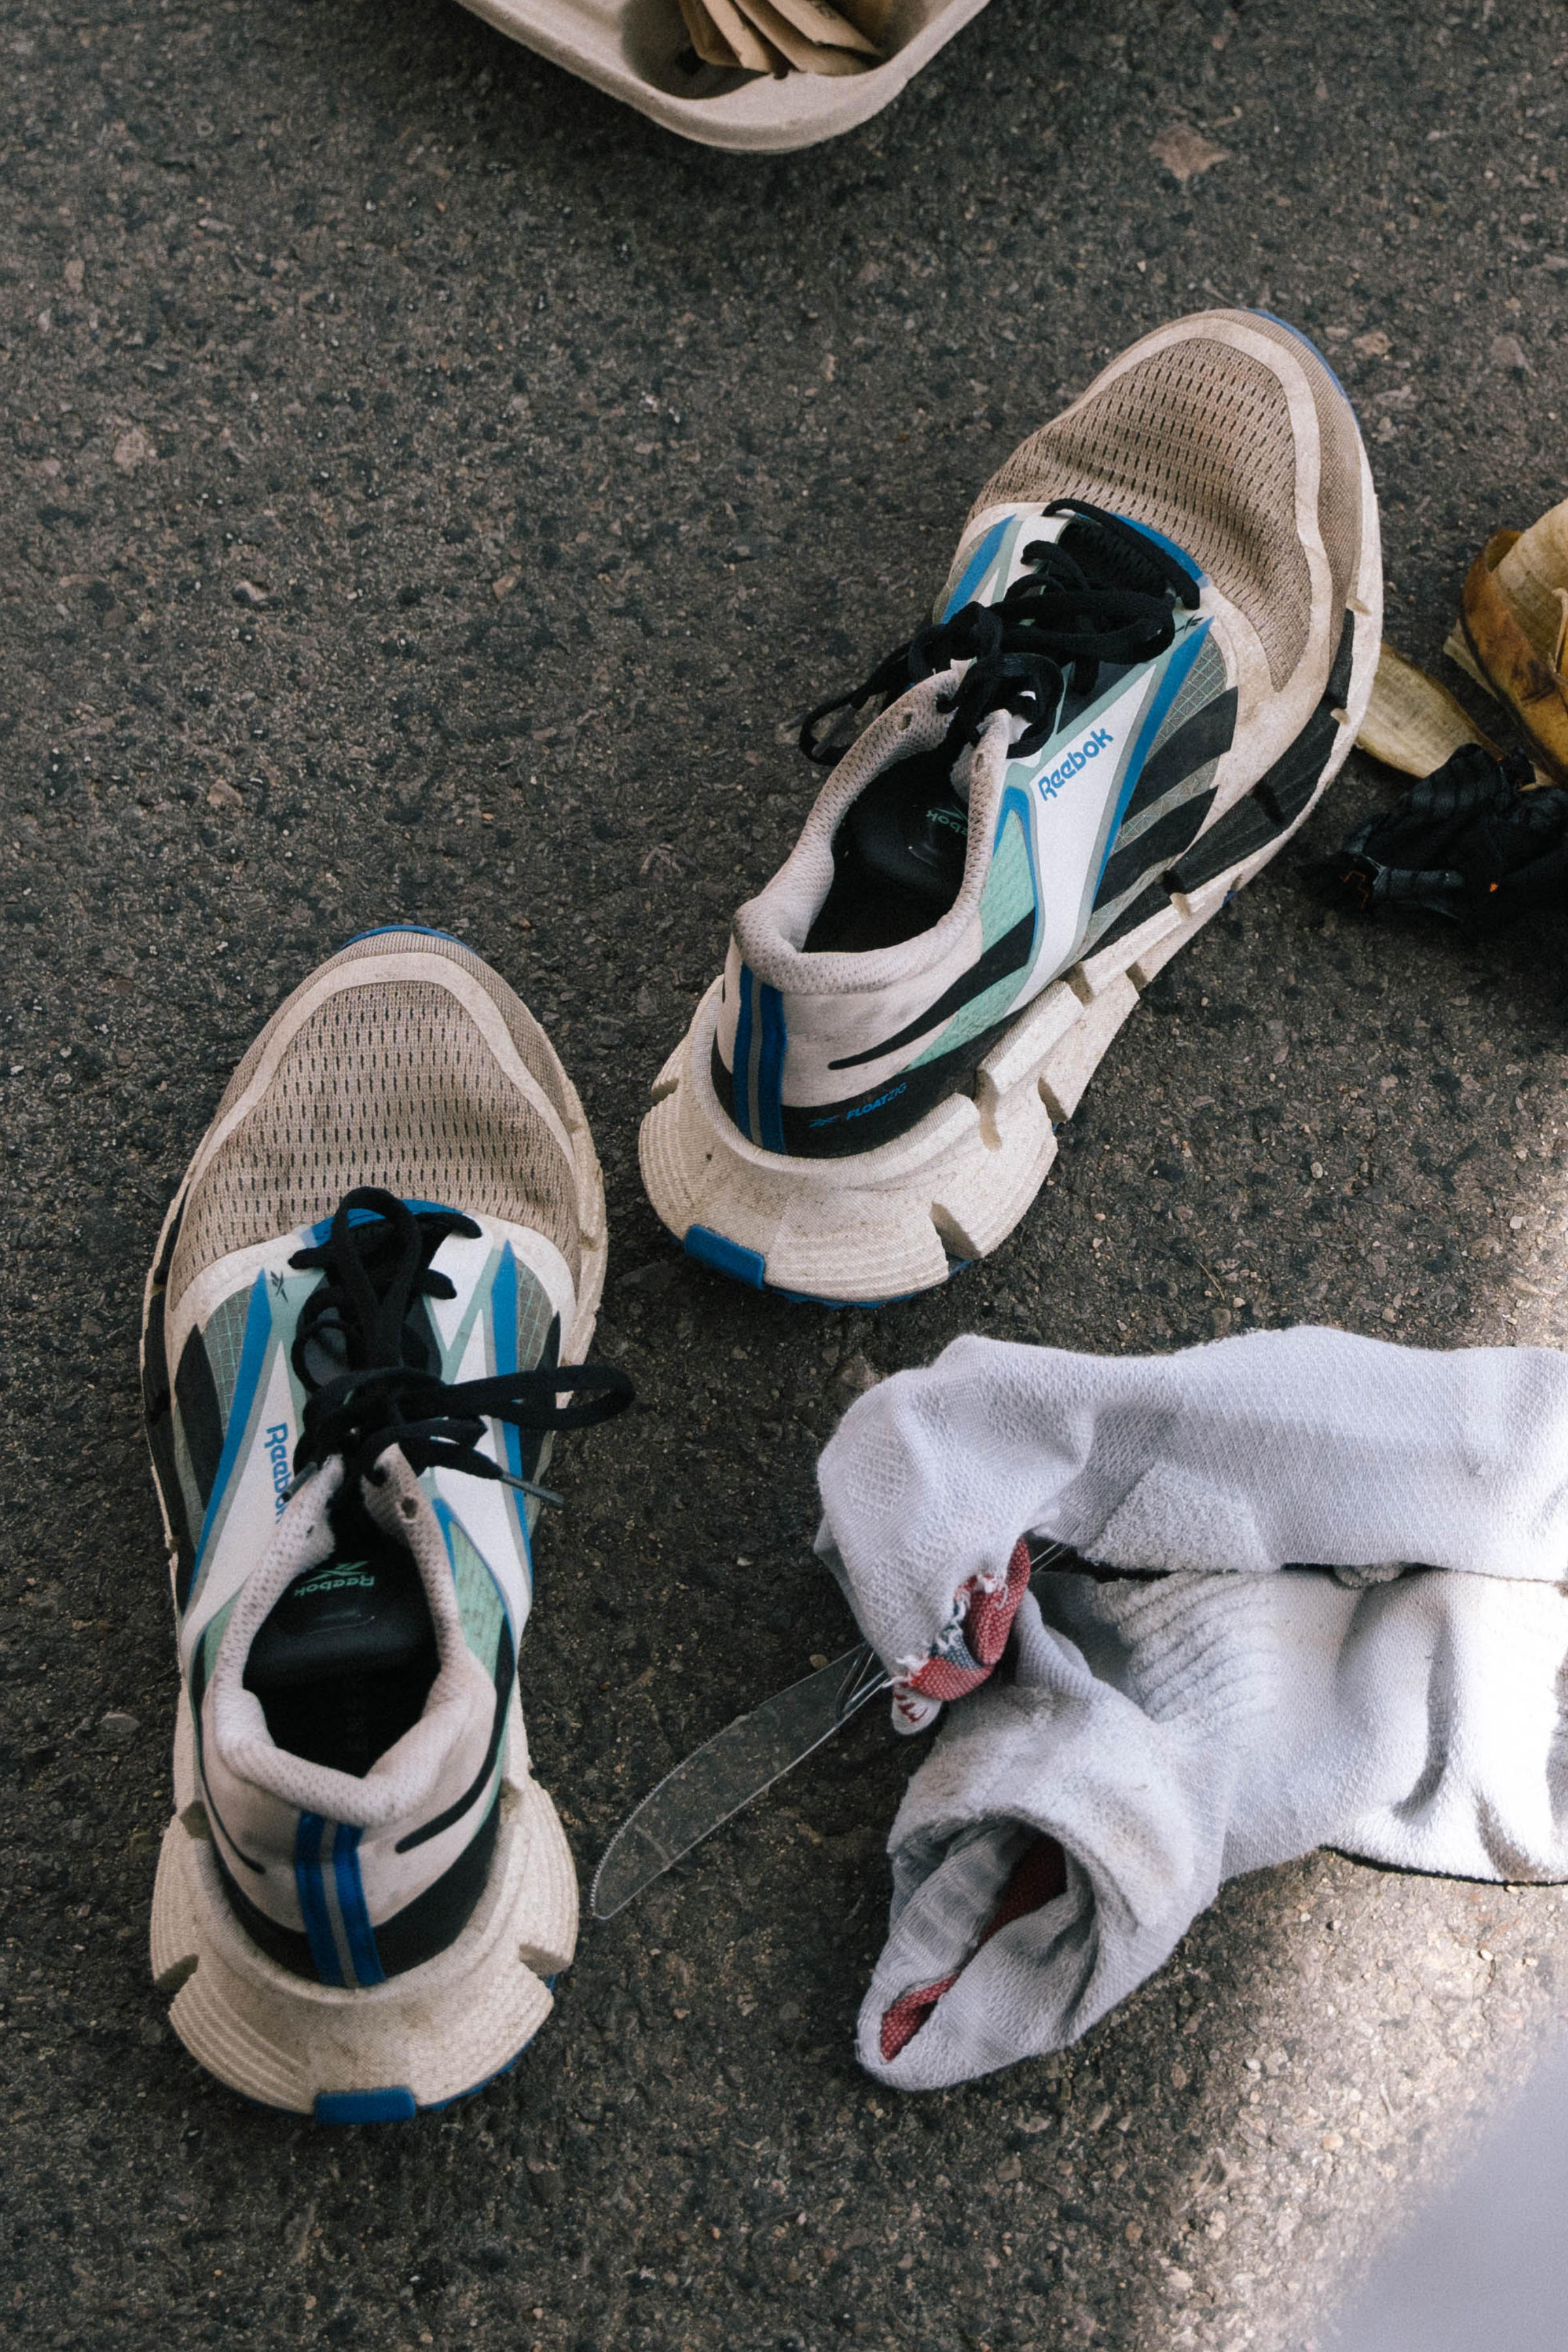 Close-up of dirty, well used running shoes and tools